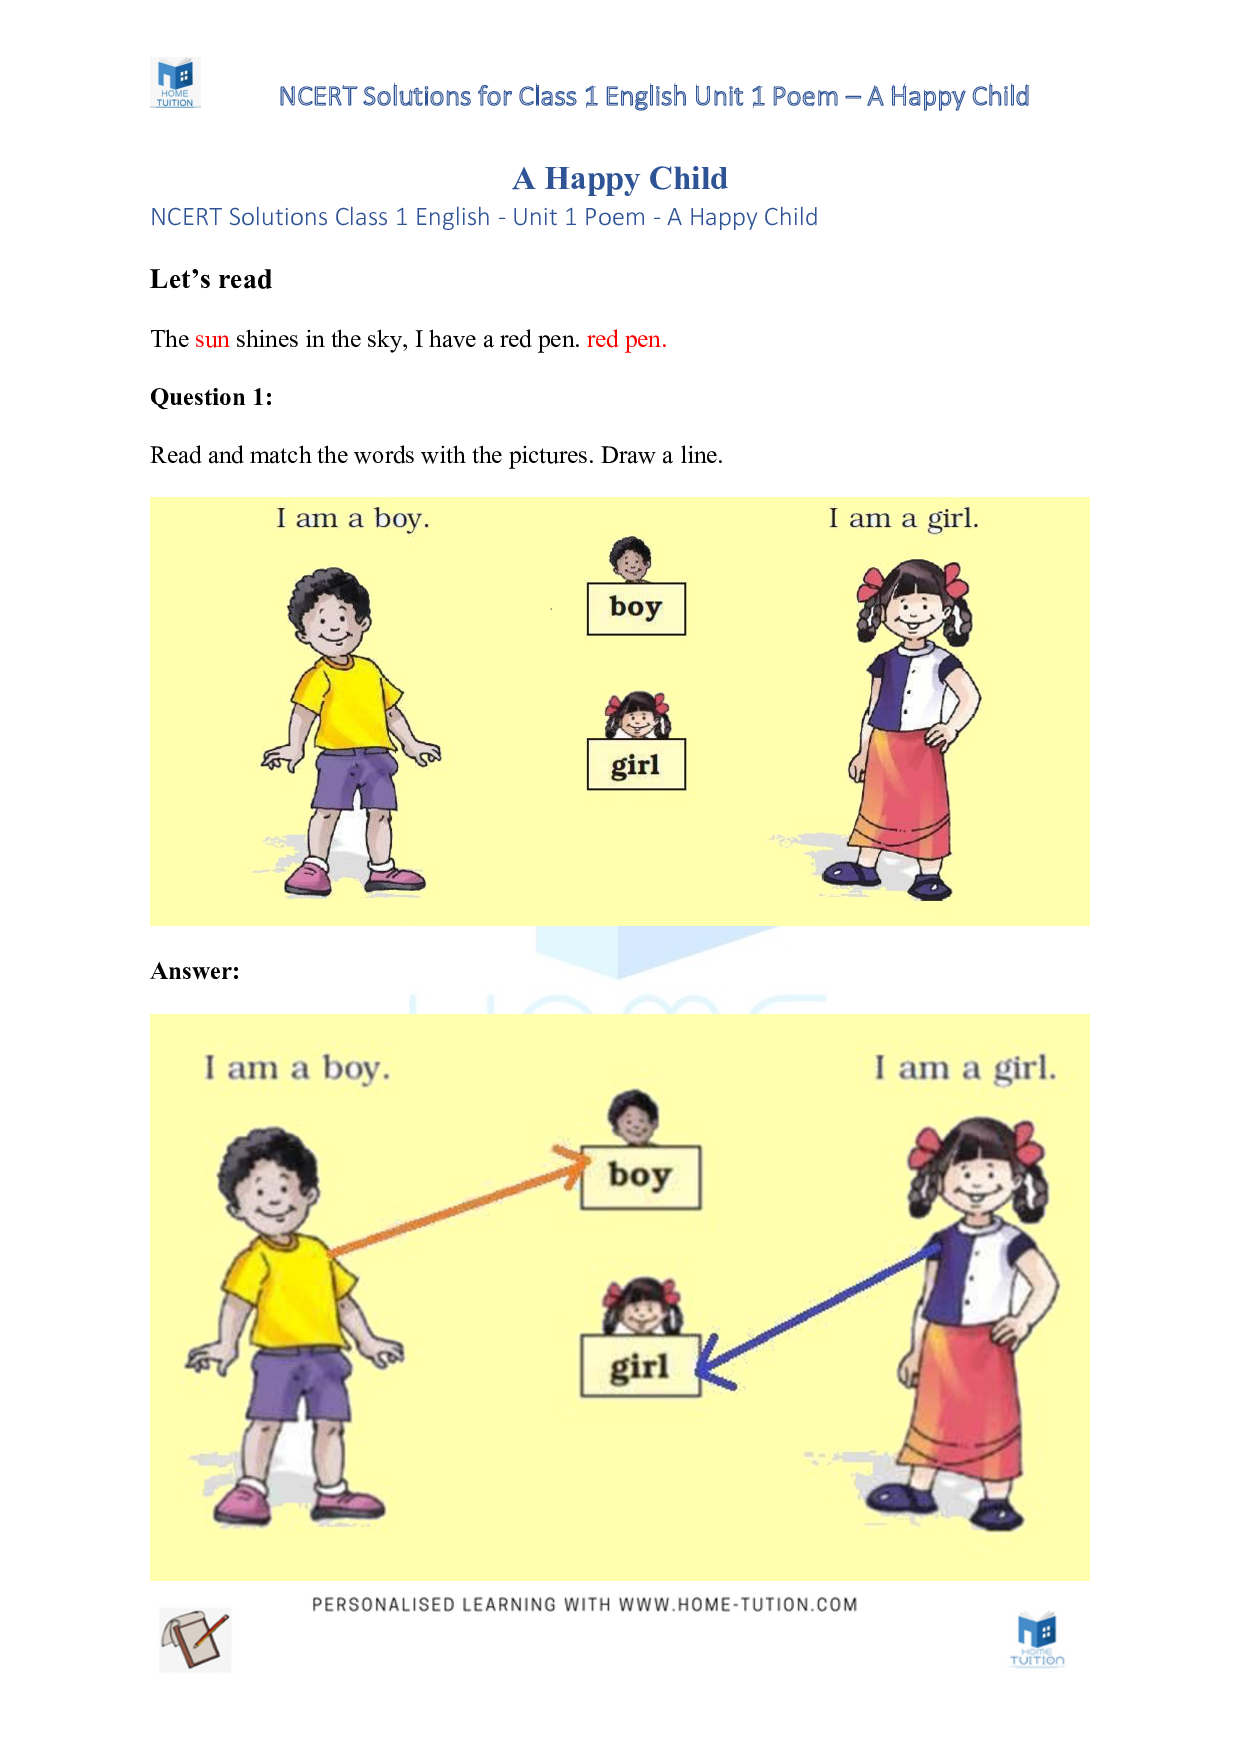 NCERT Solutions for Class 1 English Unit 1 Poem - A Happy Child